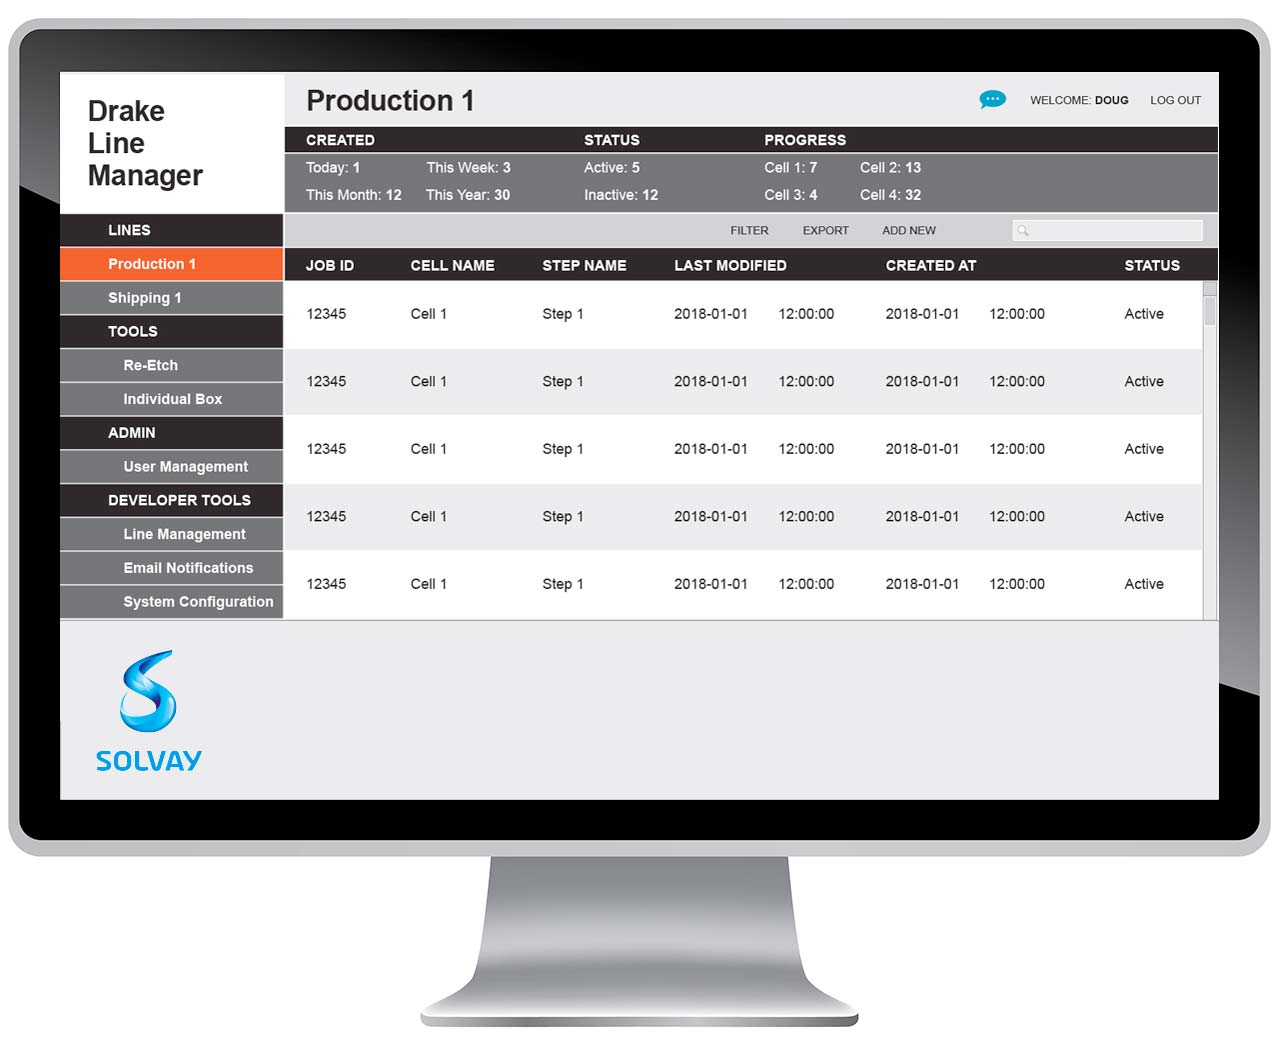 Custom Manufacturing Execution System (MES) job listing screen.